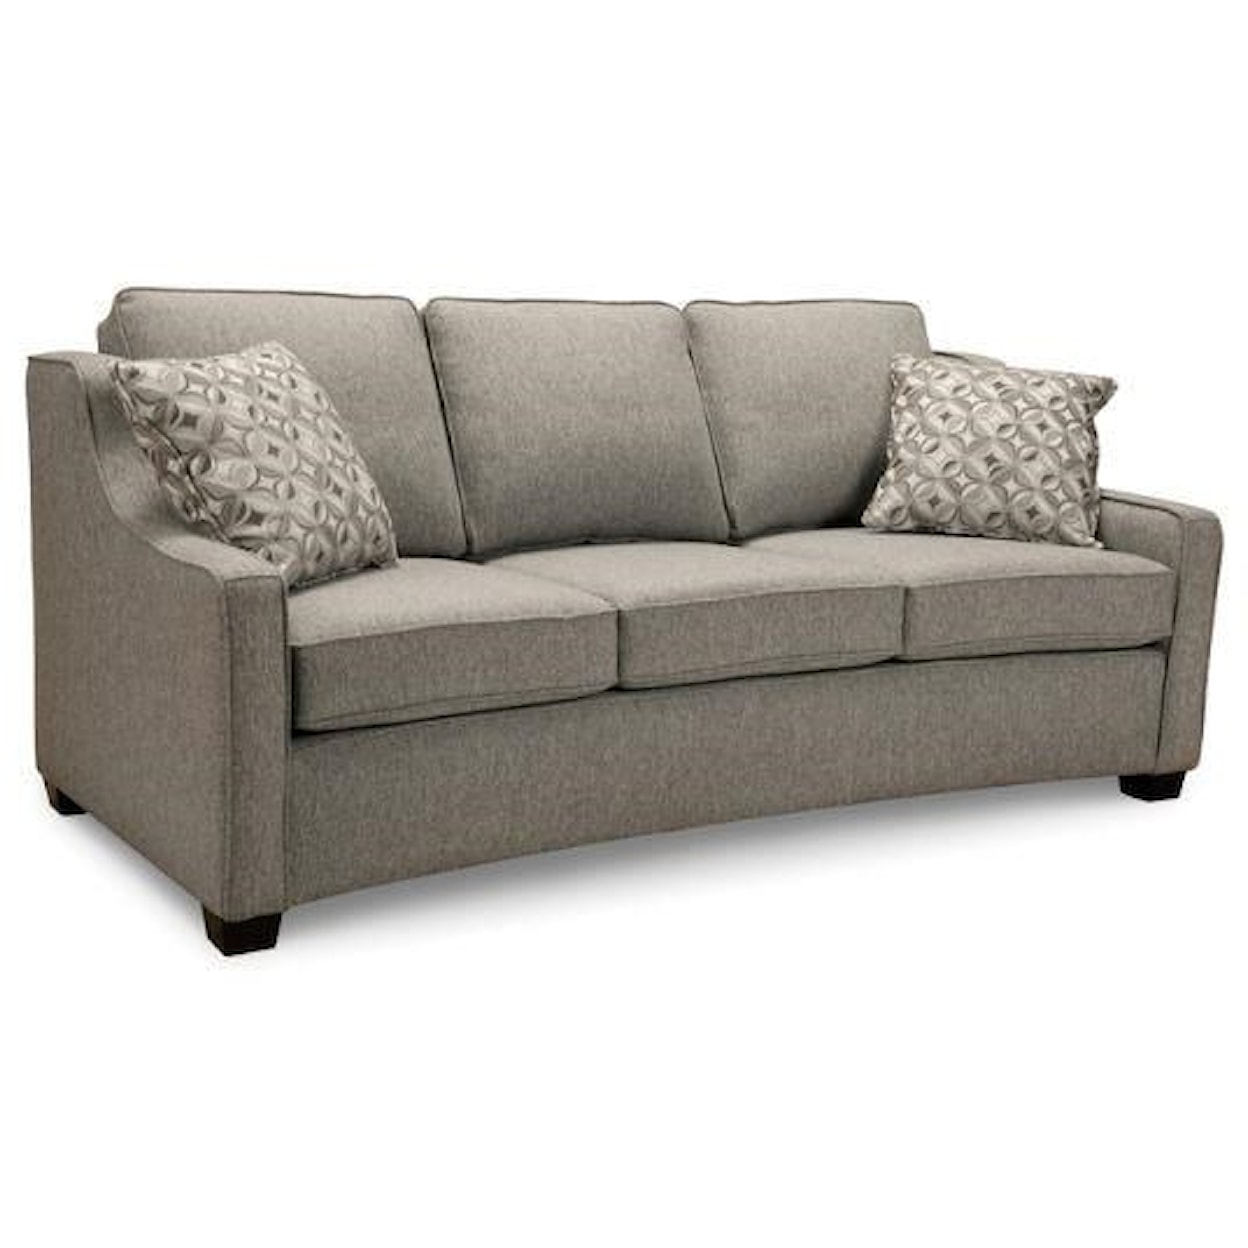 Superstyle 9670 Sofa